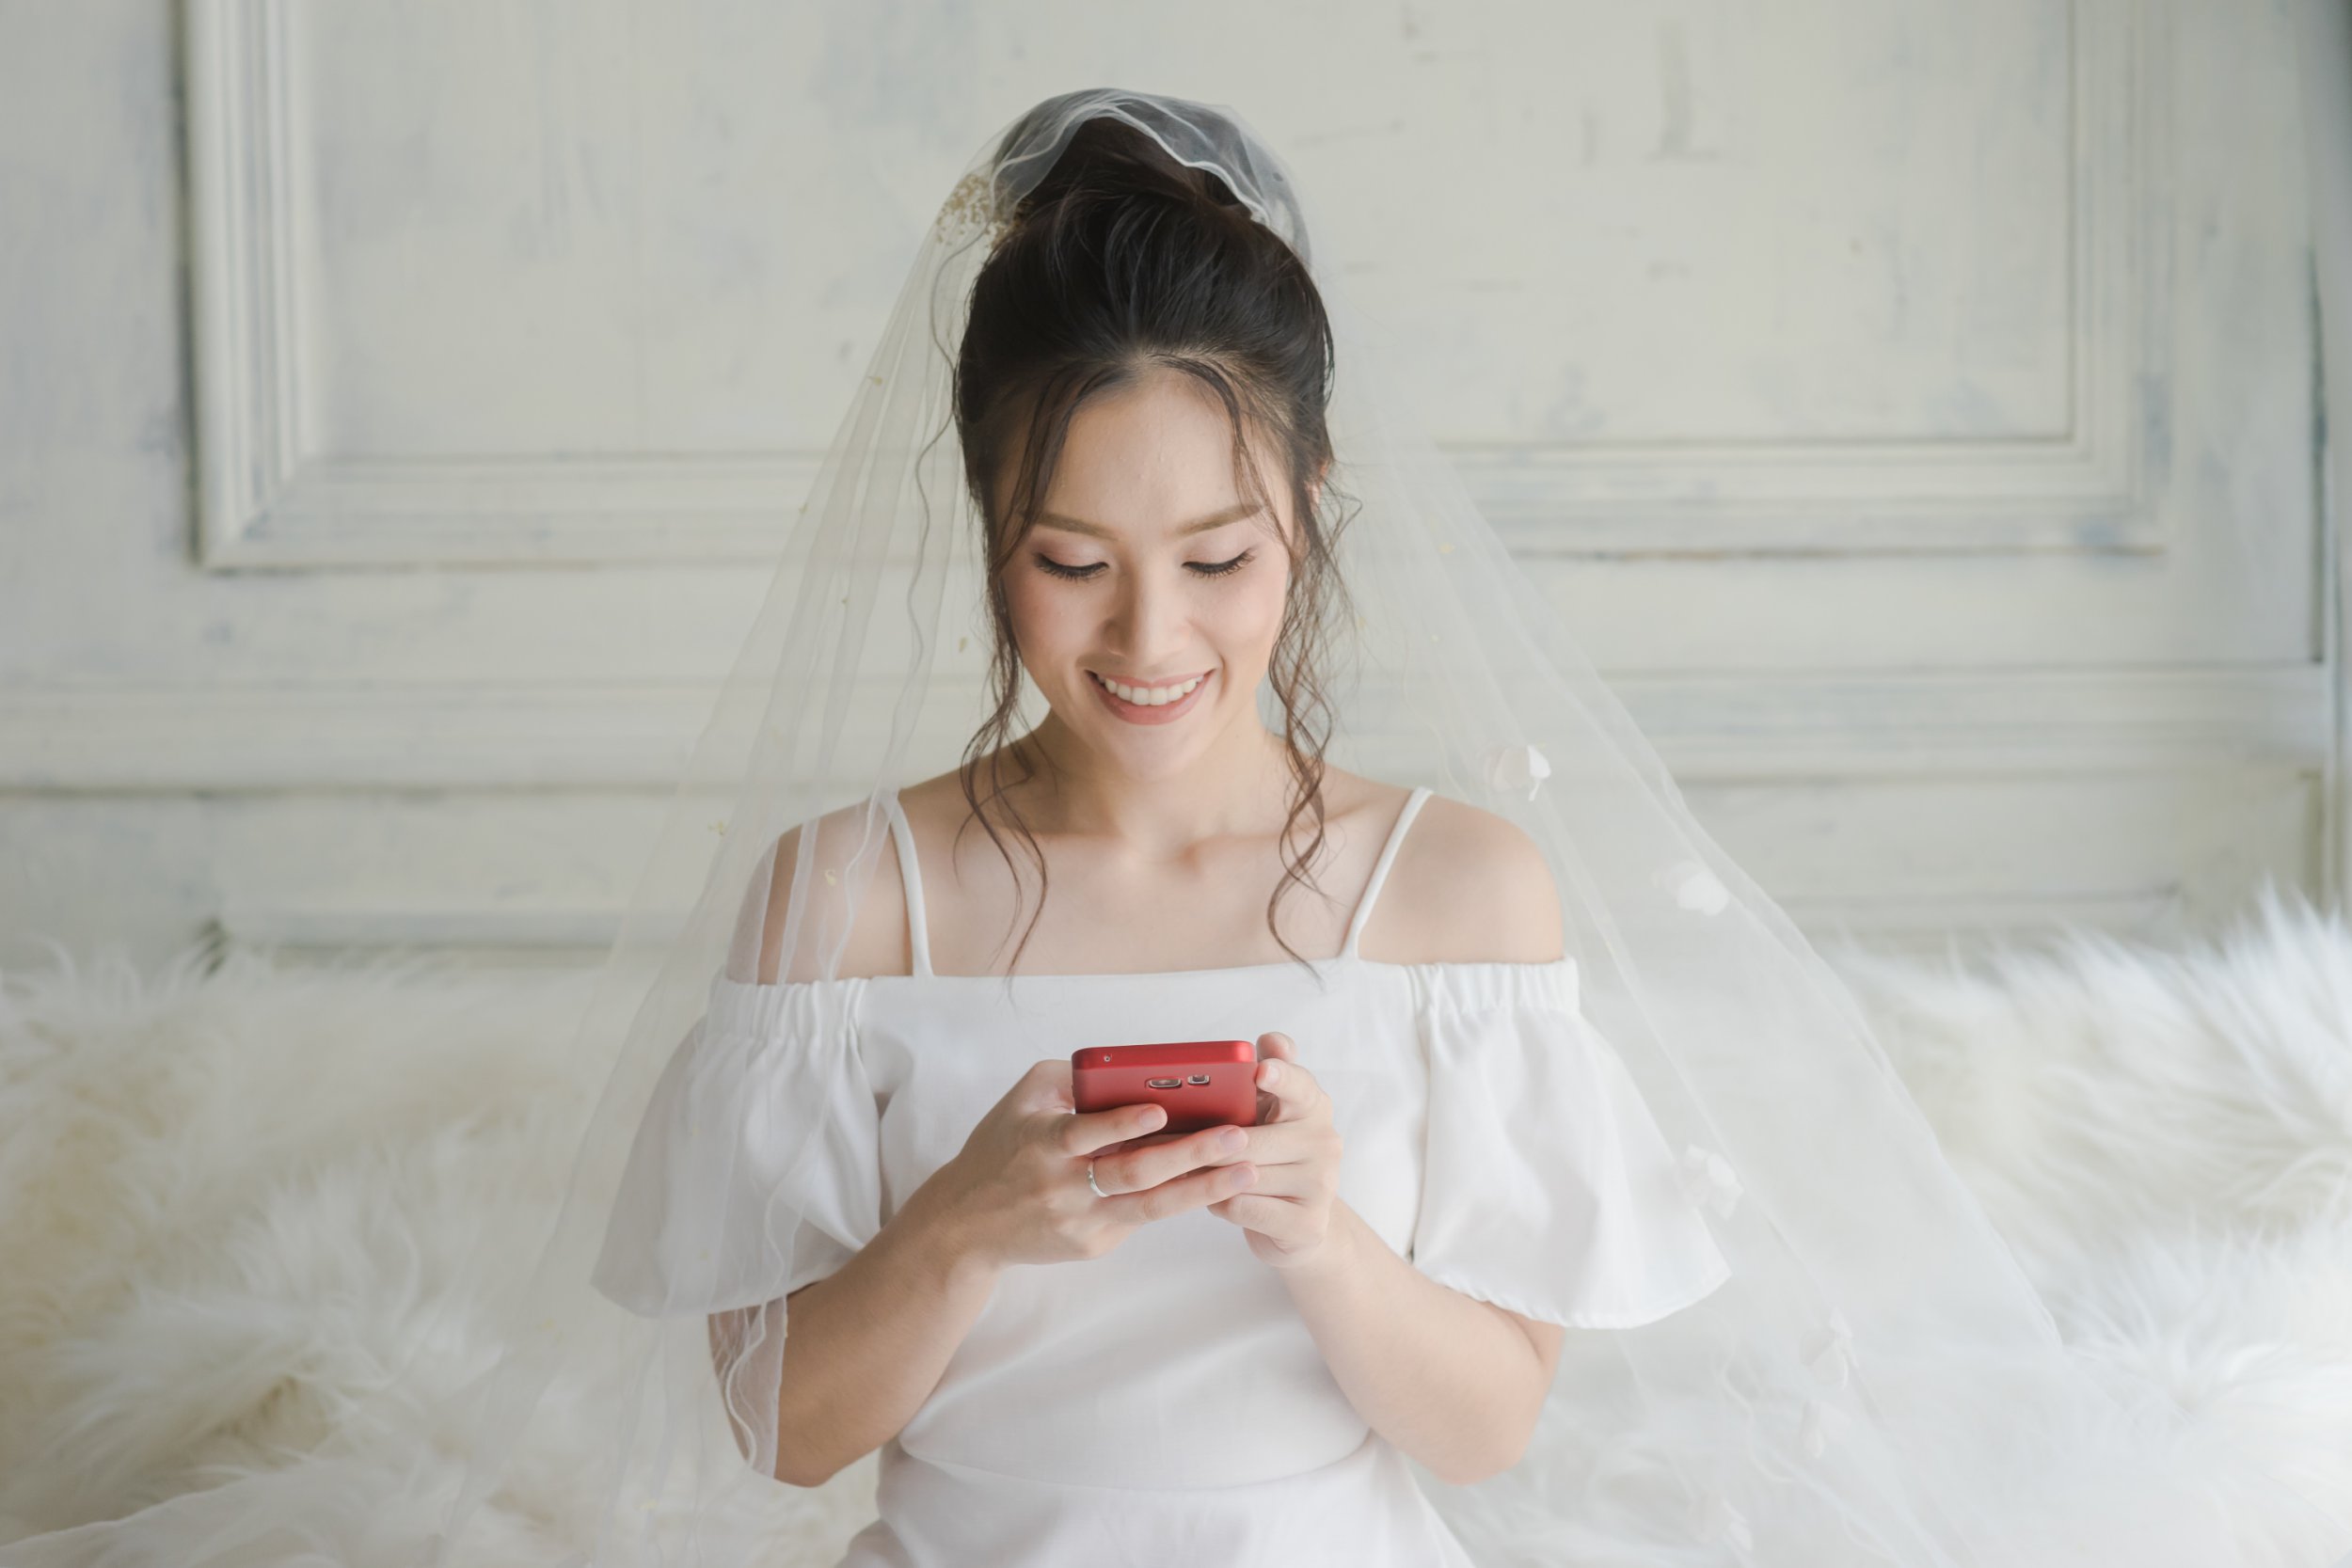 Send this sexy wedding morning text to your bride for a stress-free day